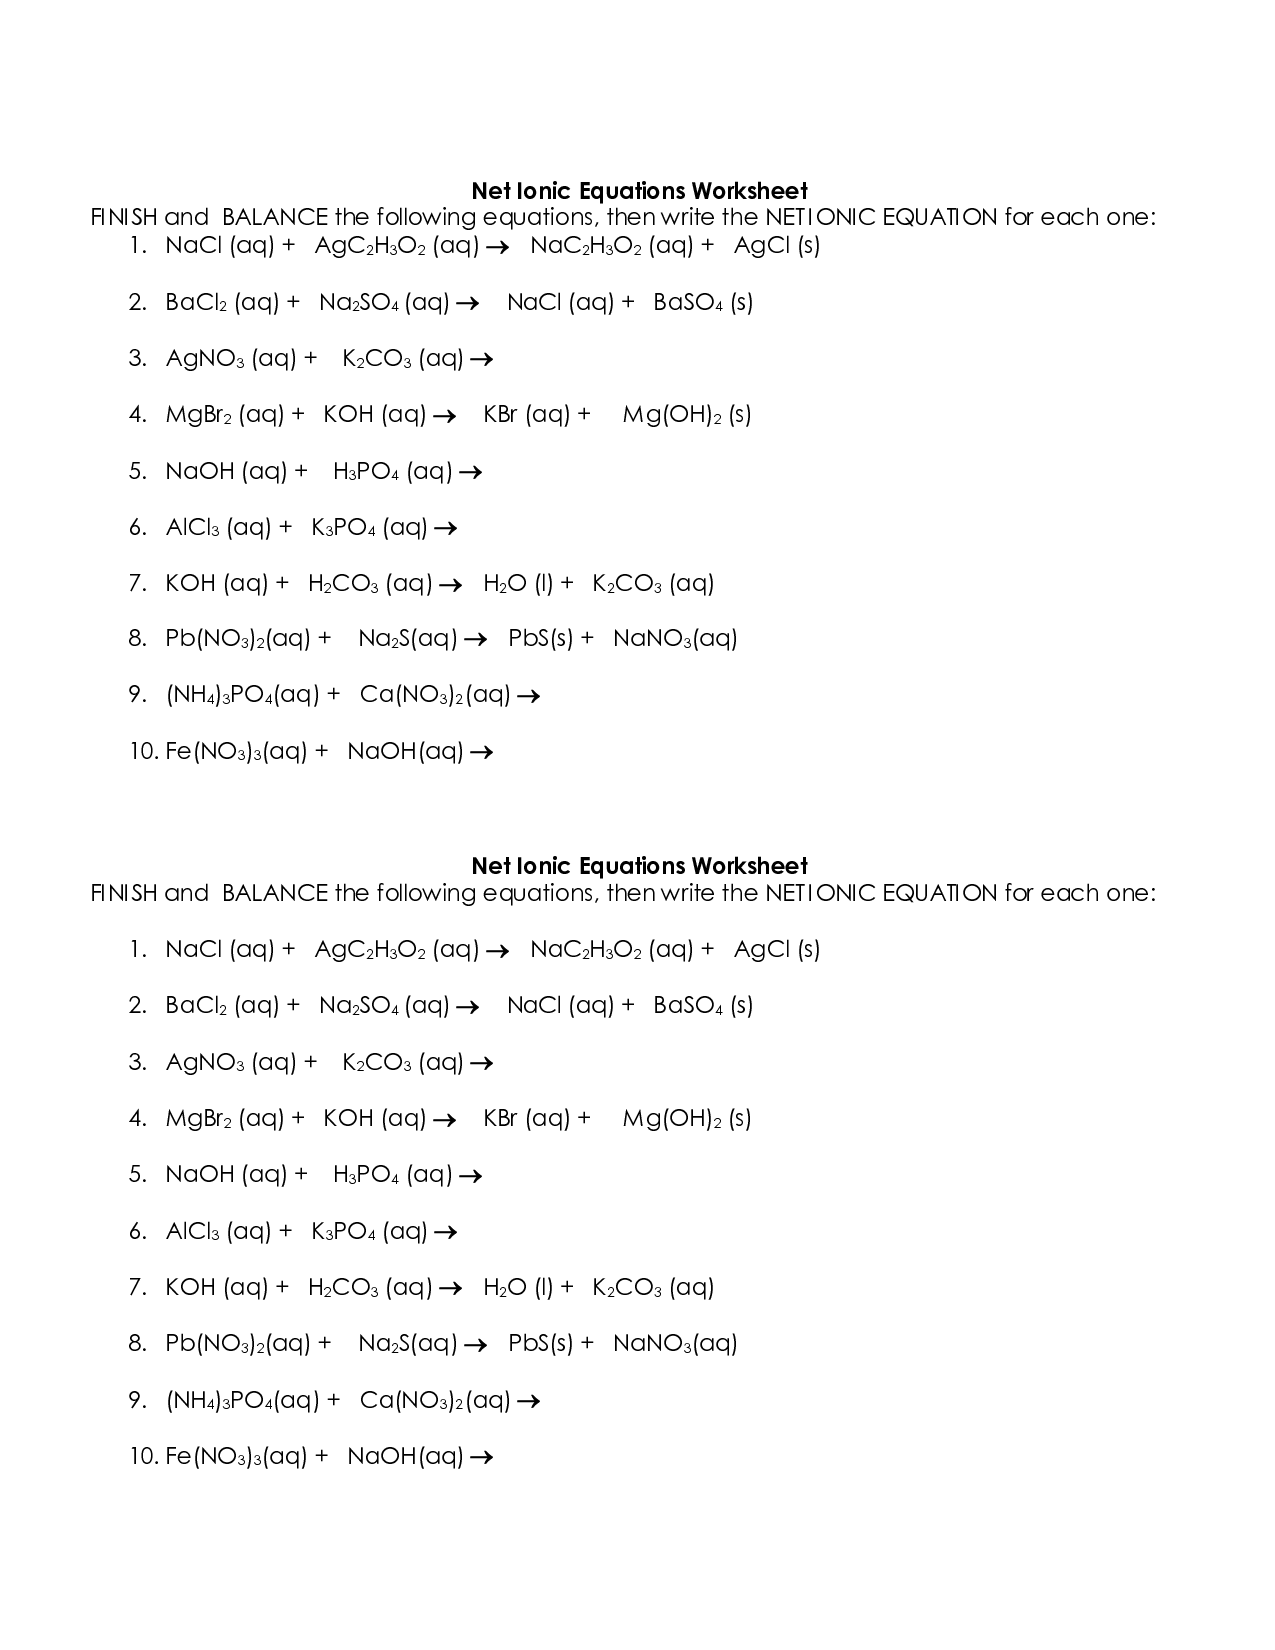 15-best-images-of-molecular-and-ionic-equations-worksheet-common-ionic-compounds-list-naming